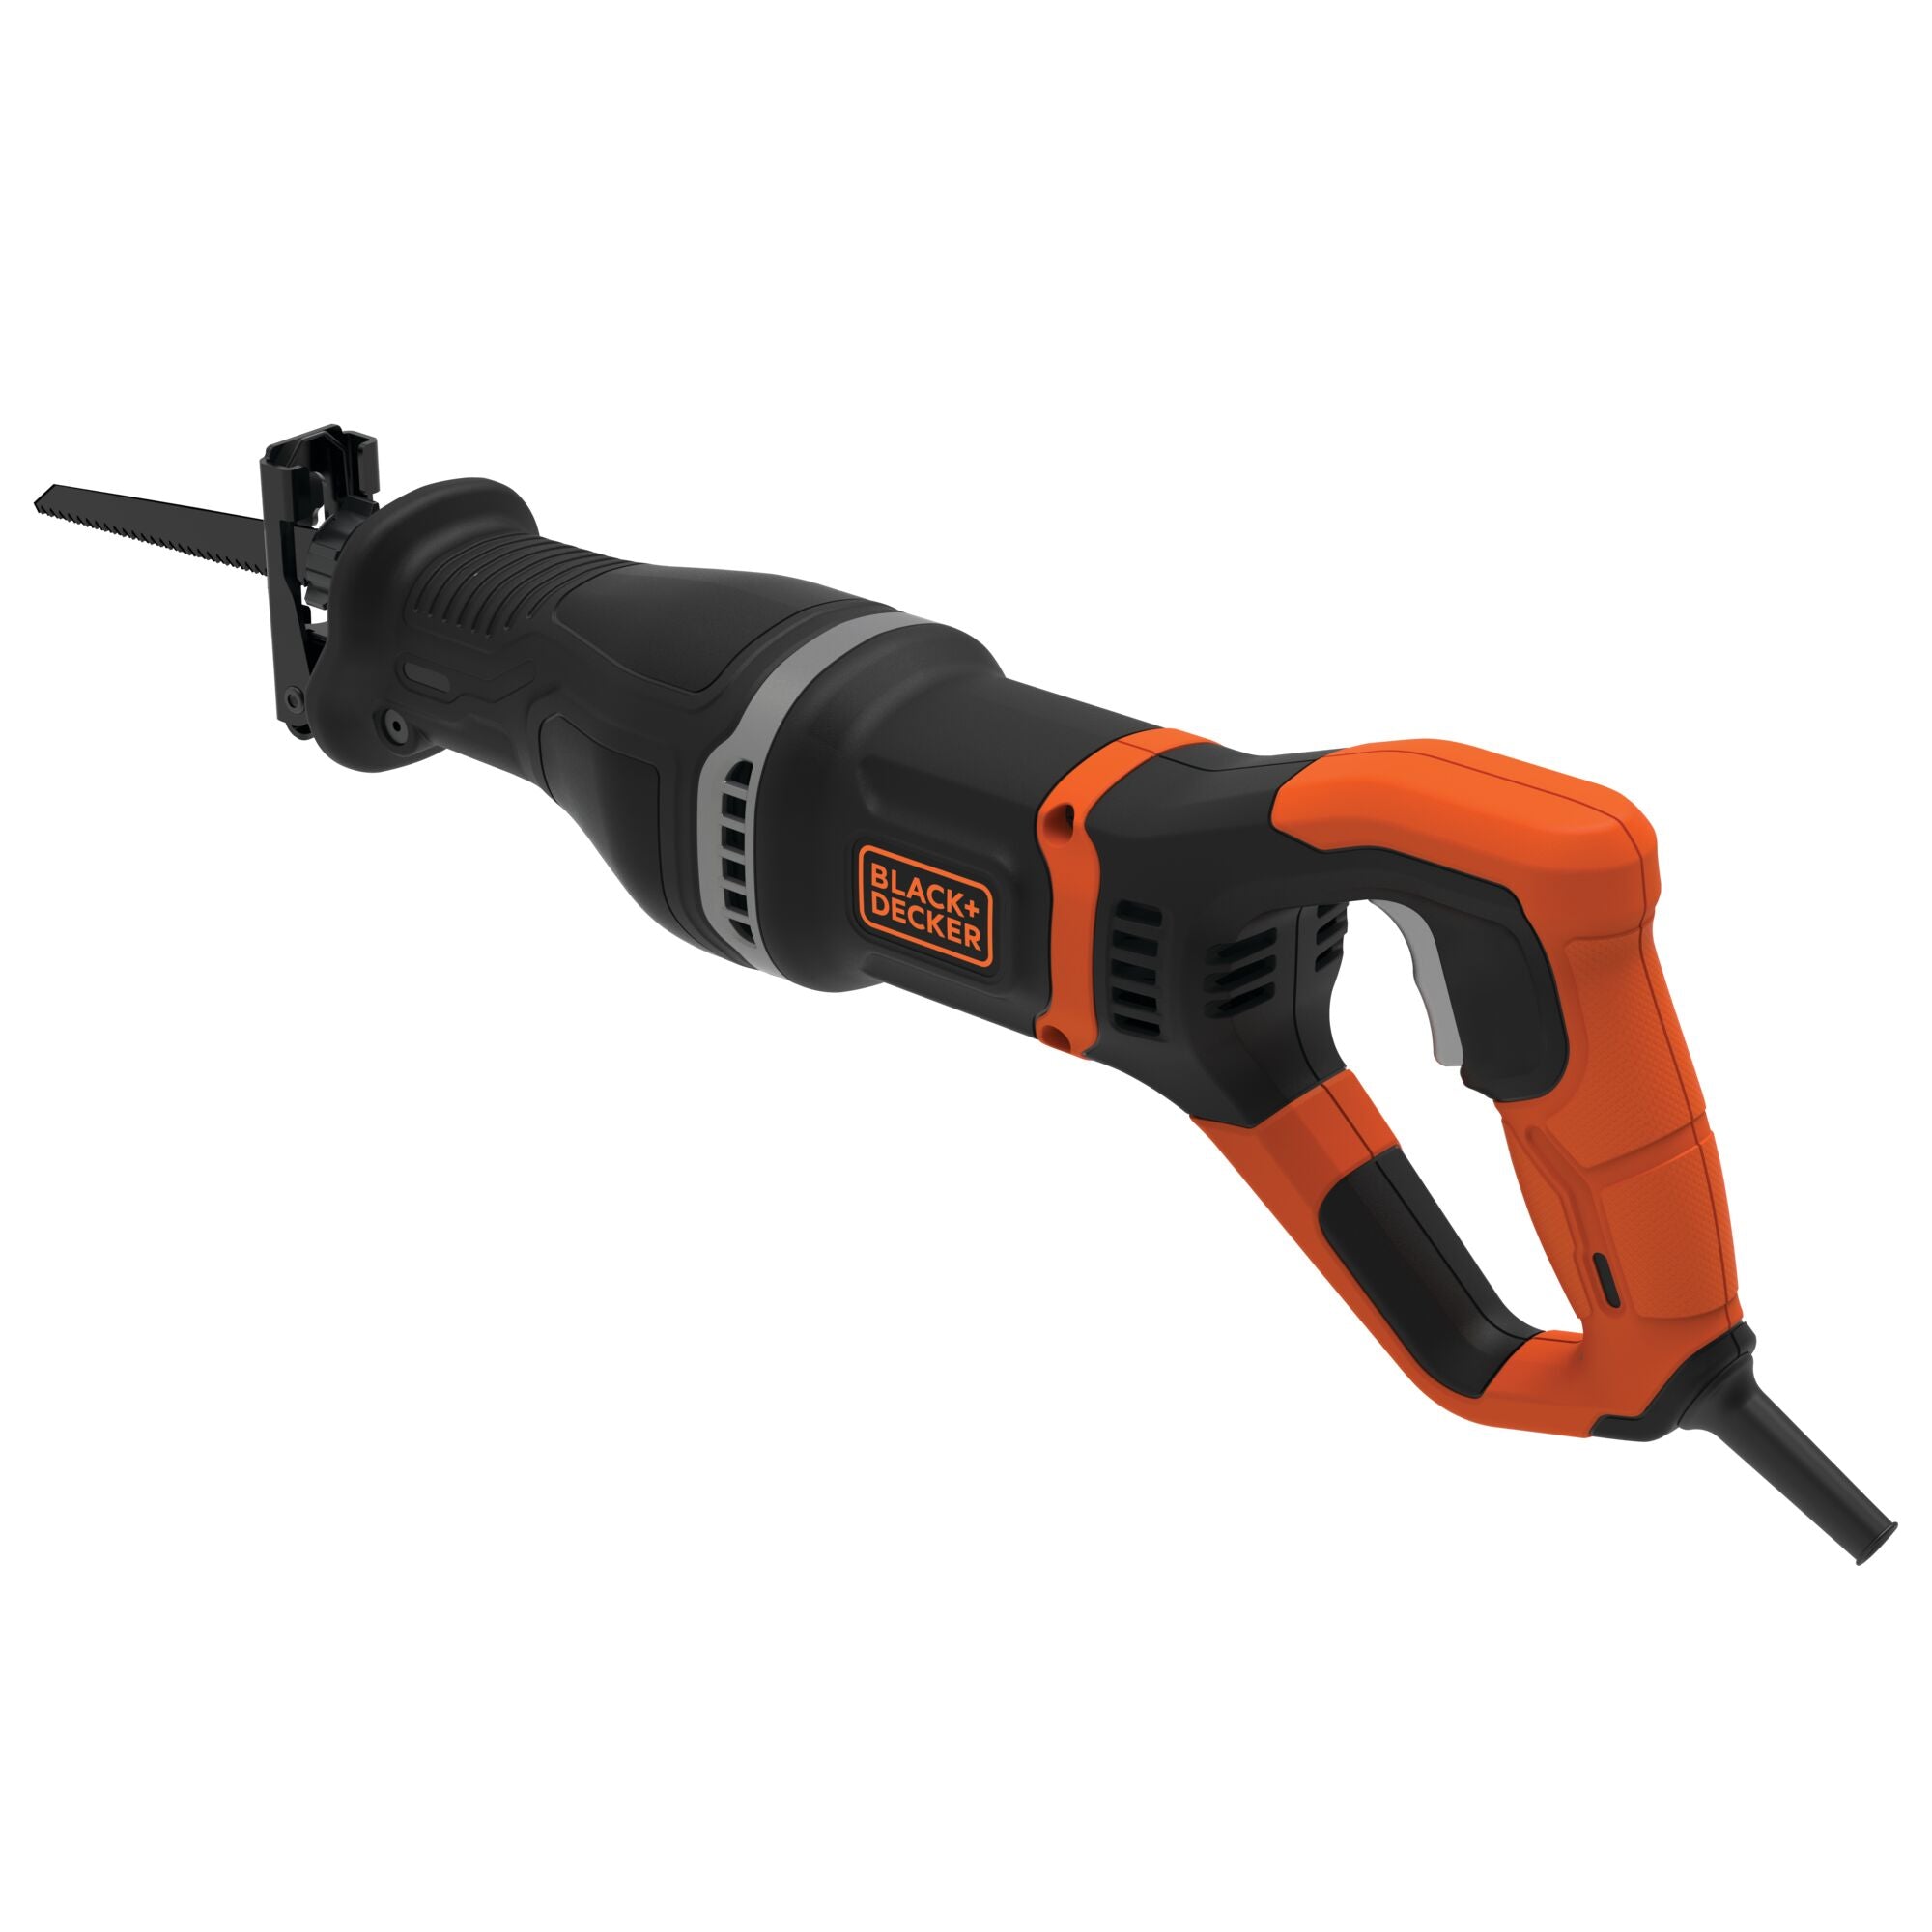 An overview of the BLACK+DECKER 7-Amp Electric Reciprocating Saw With Removable Branch Holder.